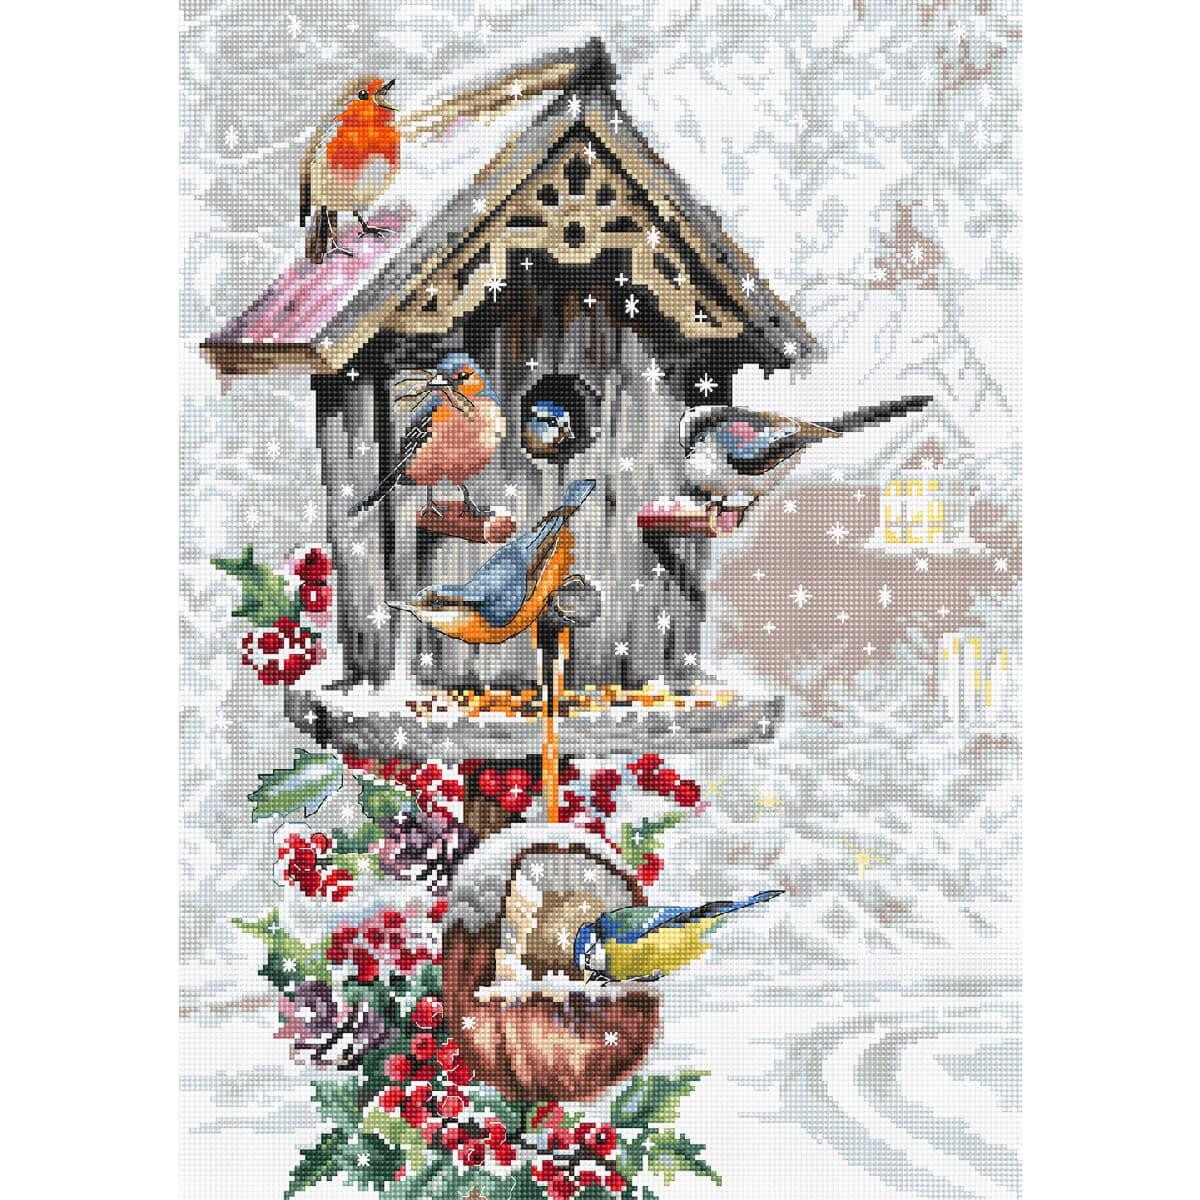 A snowy scene shows a birdhouse with several colorful...